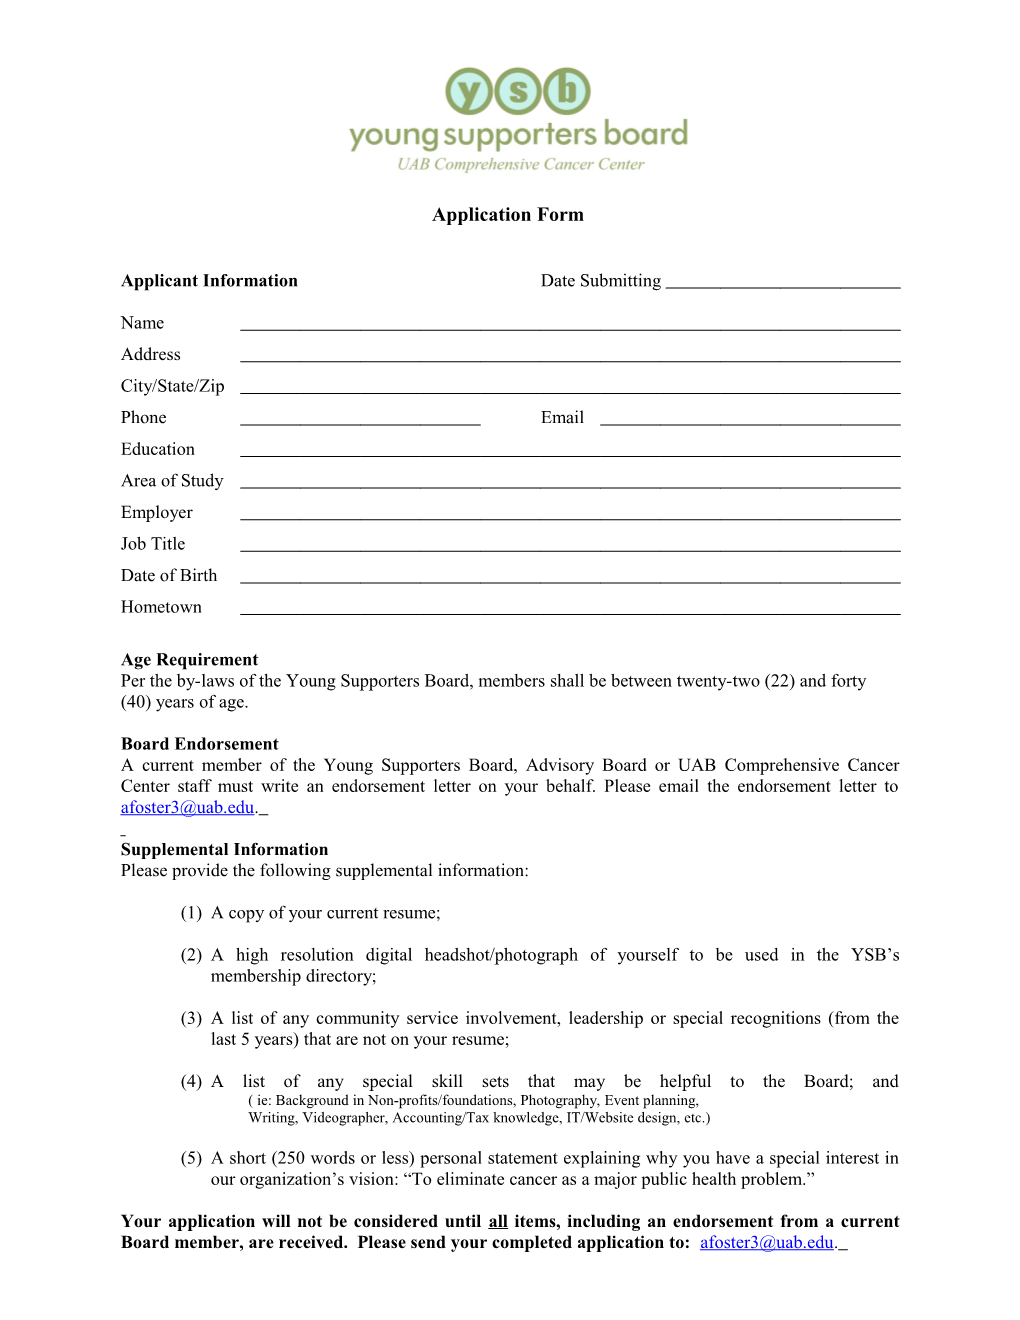 Application Form s35